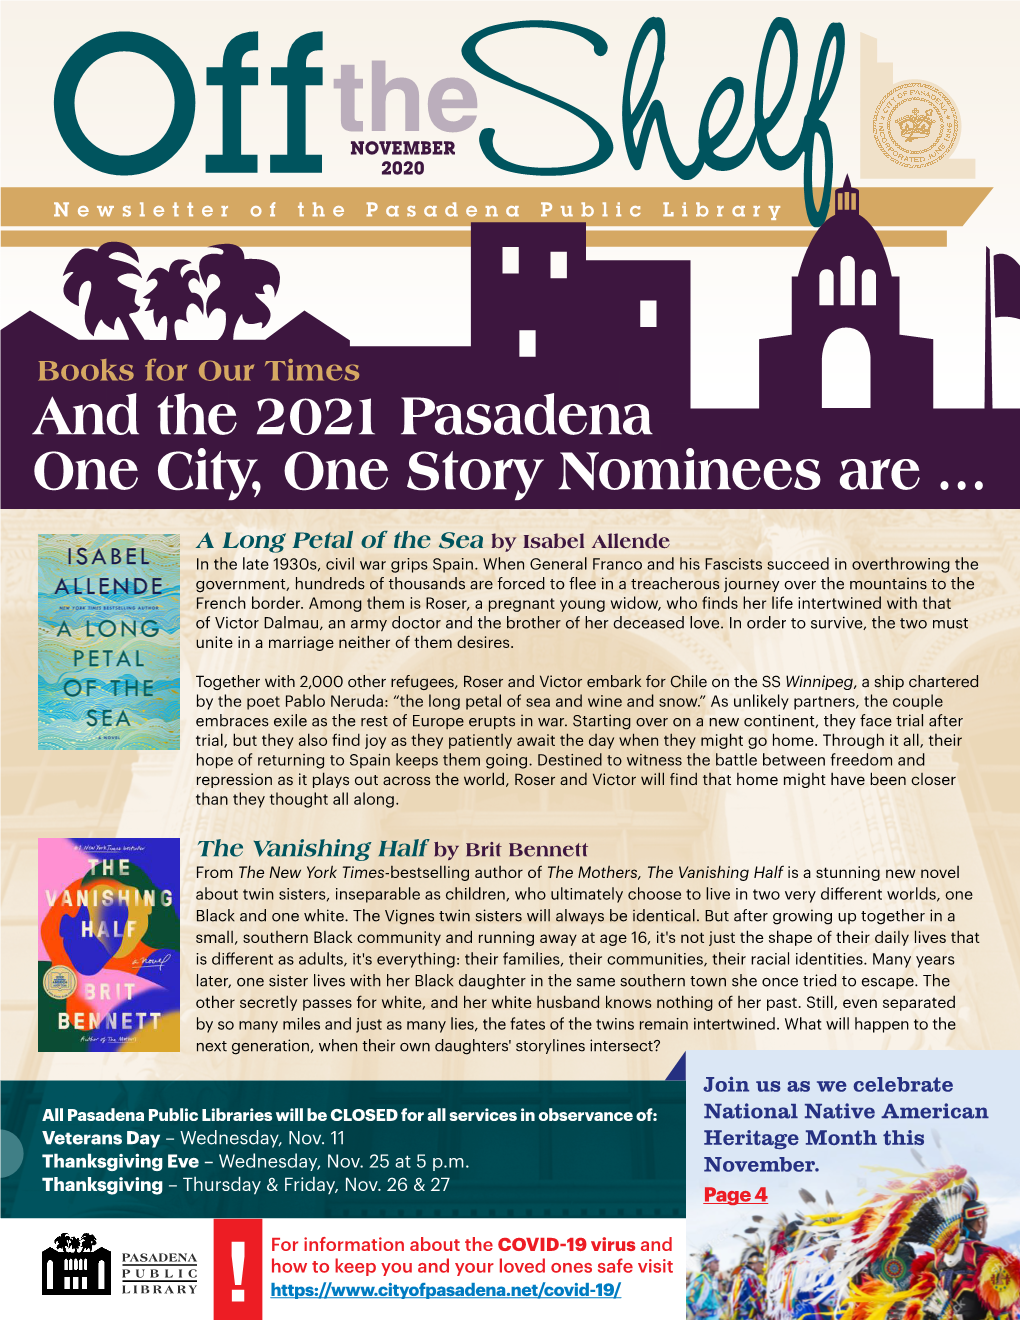 And the 2021 Pasadena One City, One Story Nominees Are …